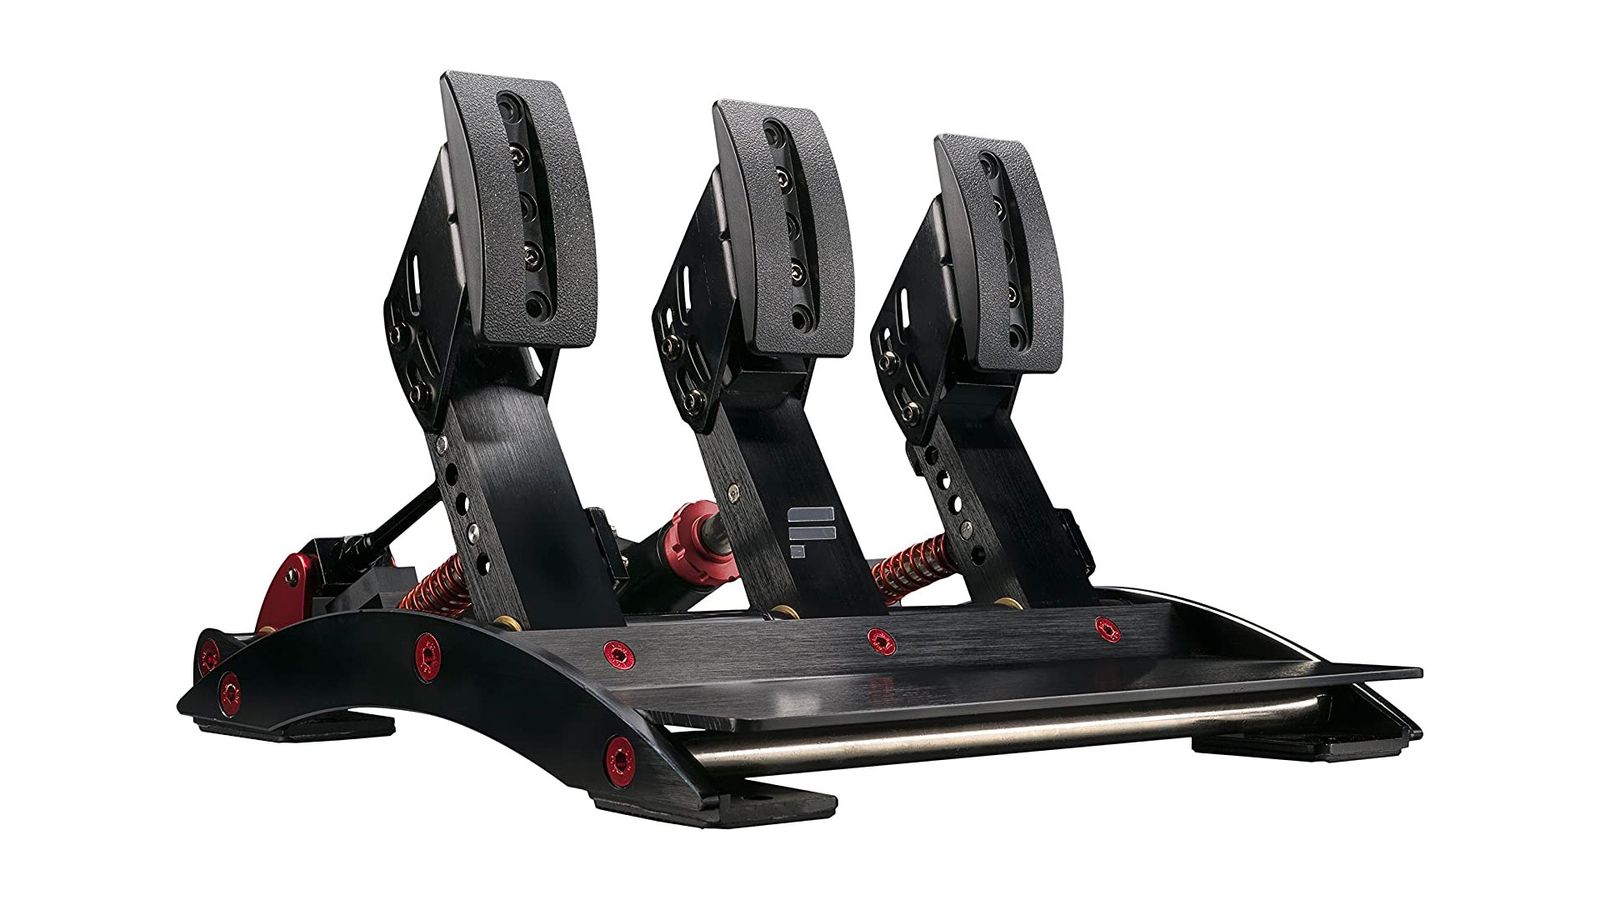 Fanatec ClubSport Pedals v3 product image of a black and red set of three pedals.